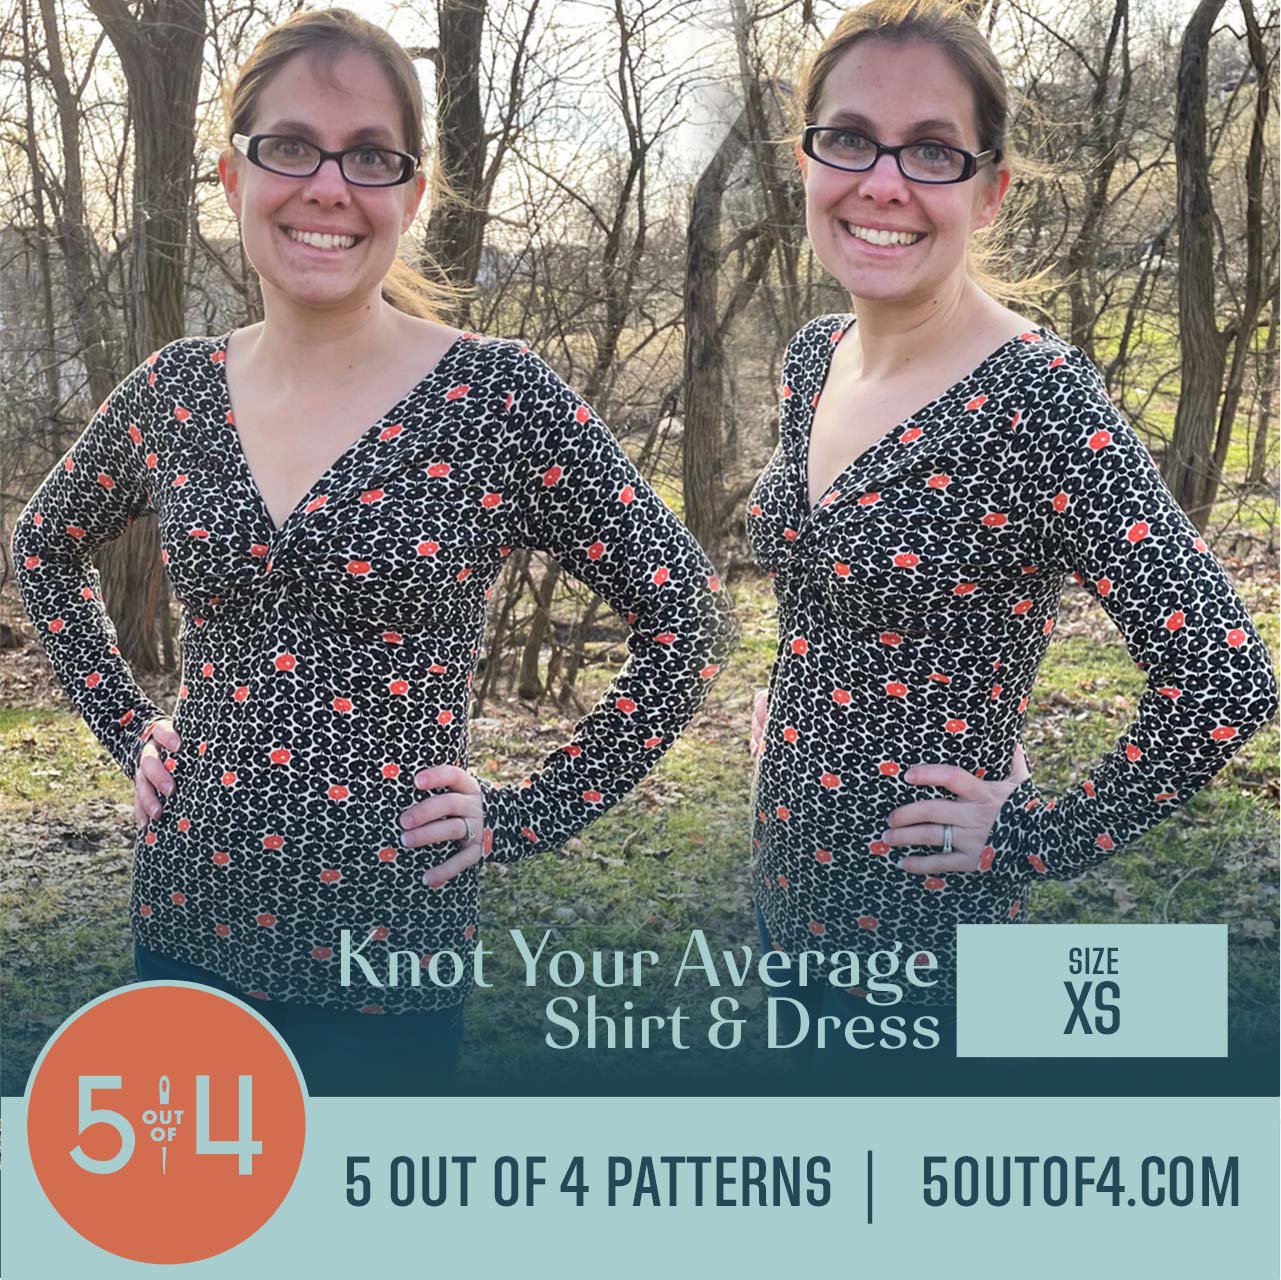 Free Sewing Patterns Archives - Swoodson Says